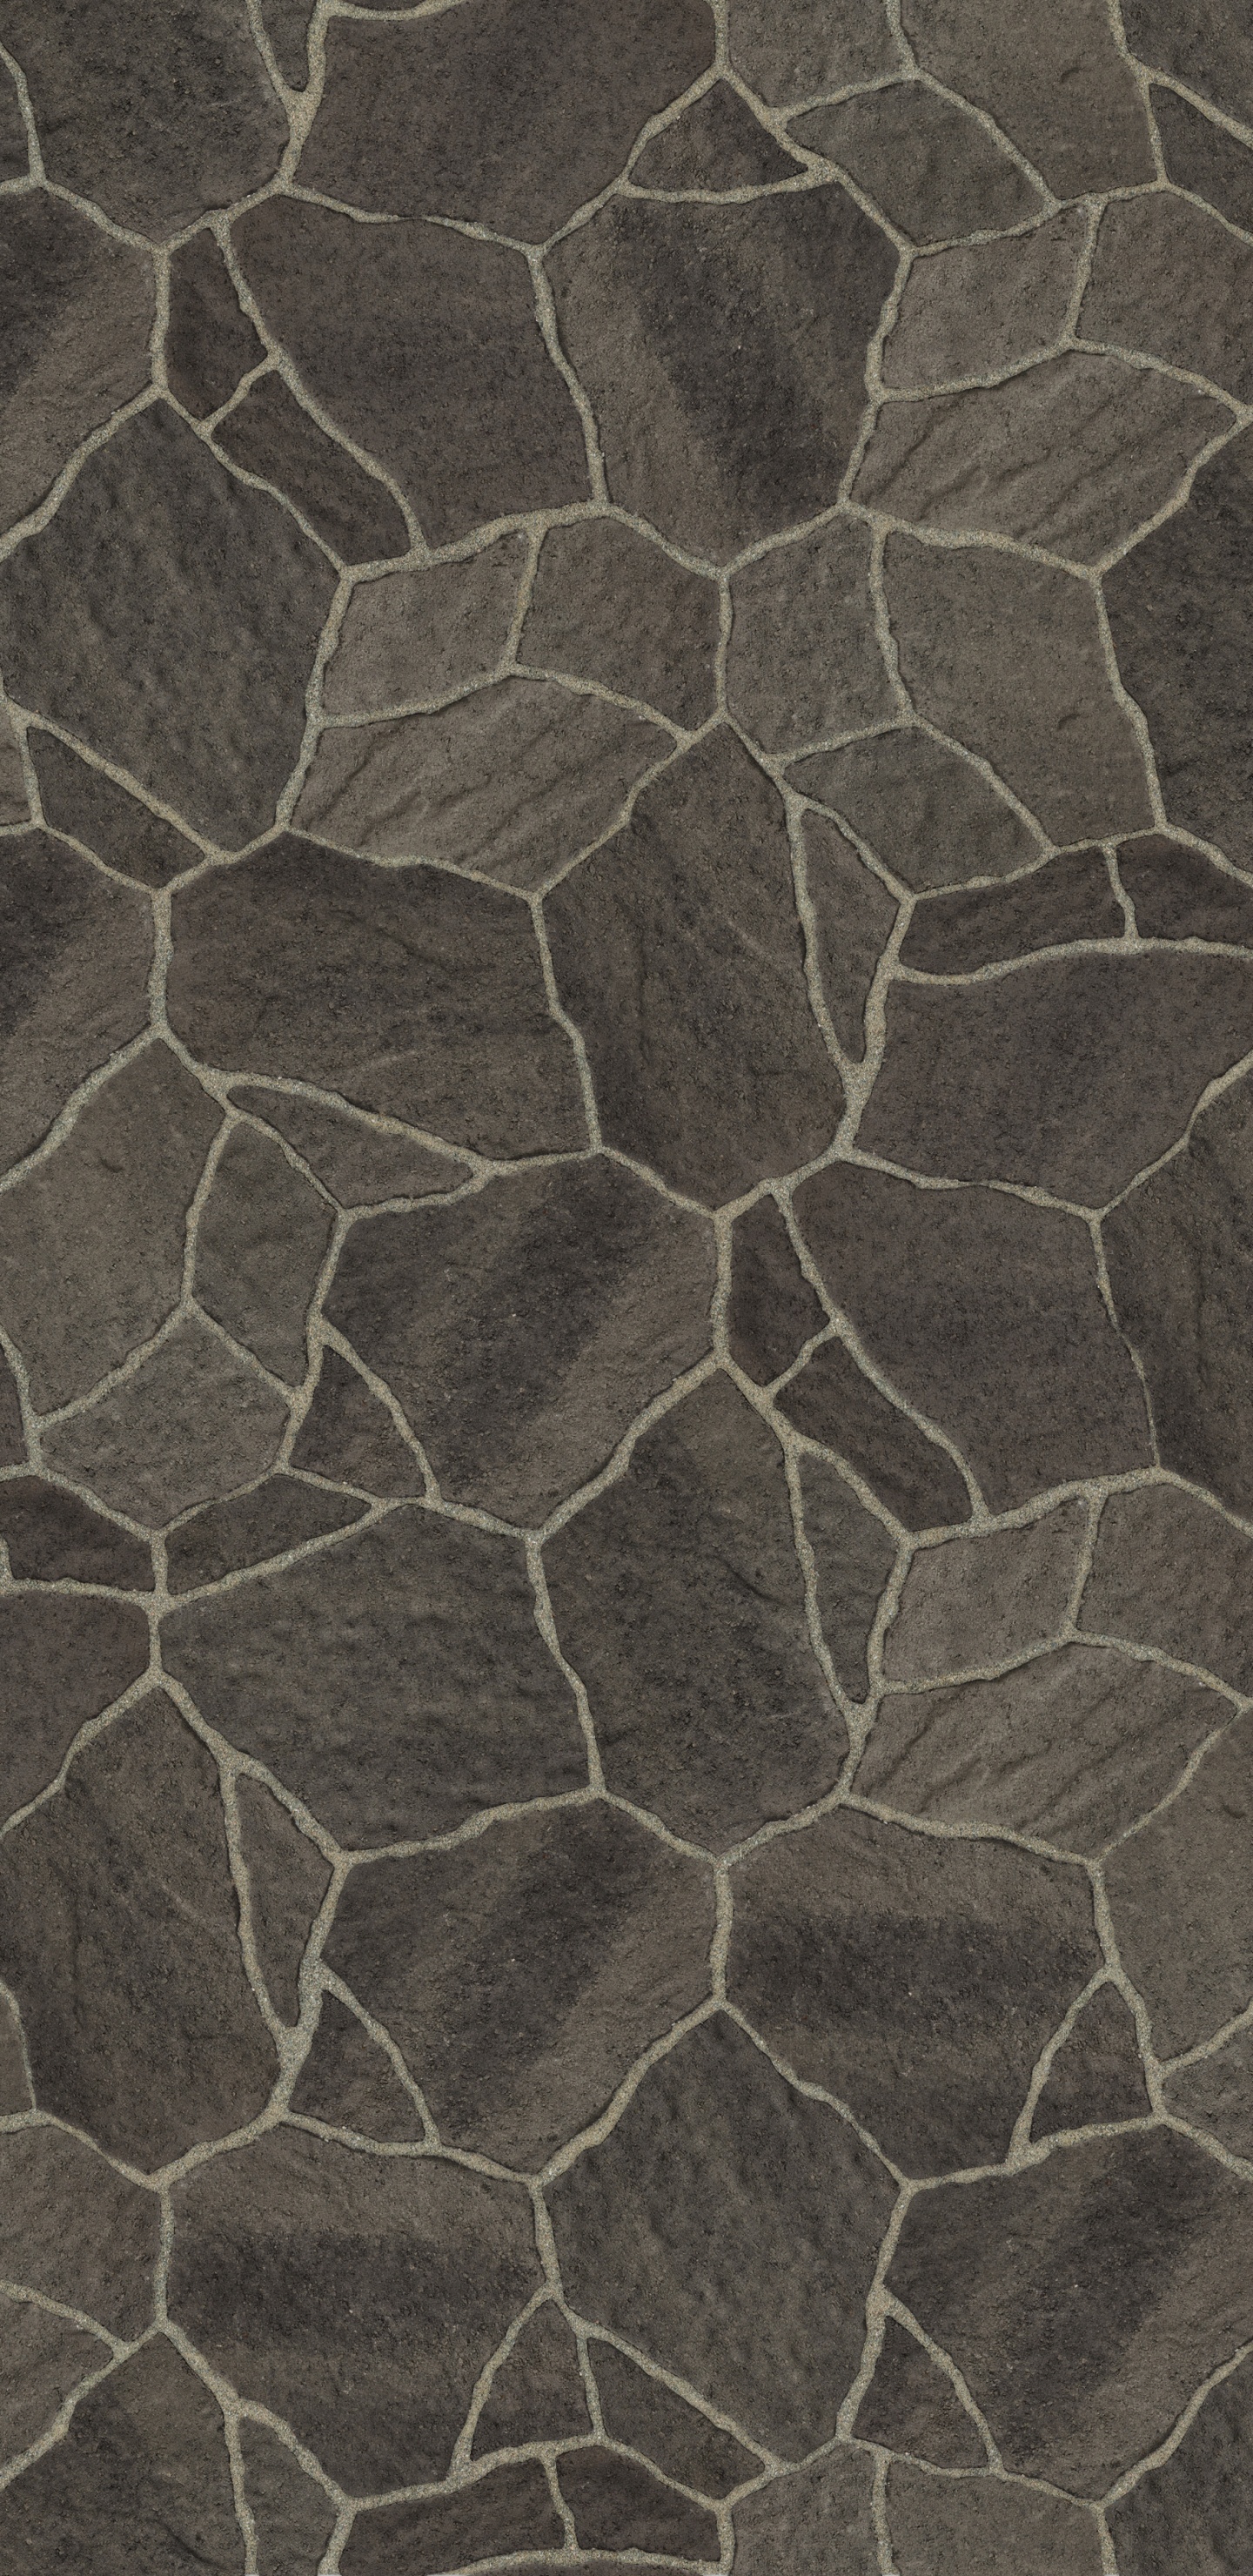 Brown and Black Concrete Floor. Wallpaper in 1440x2960 Resolution